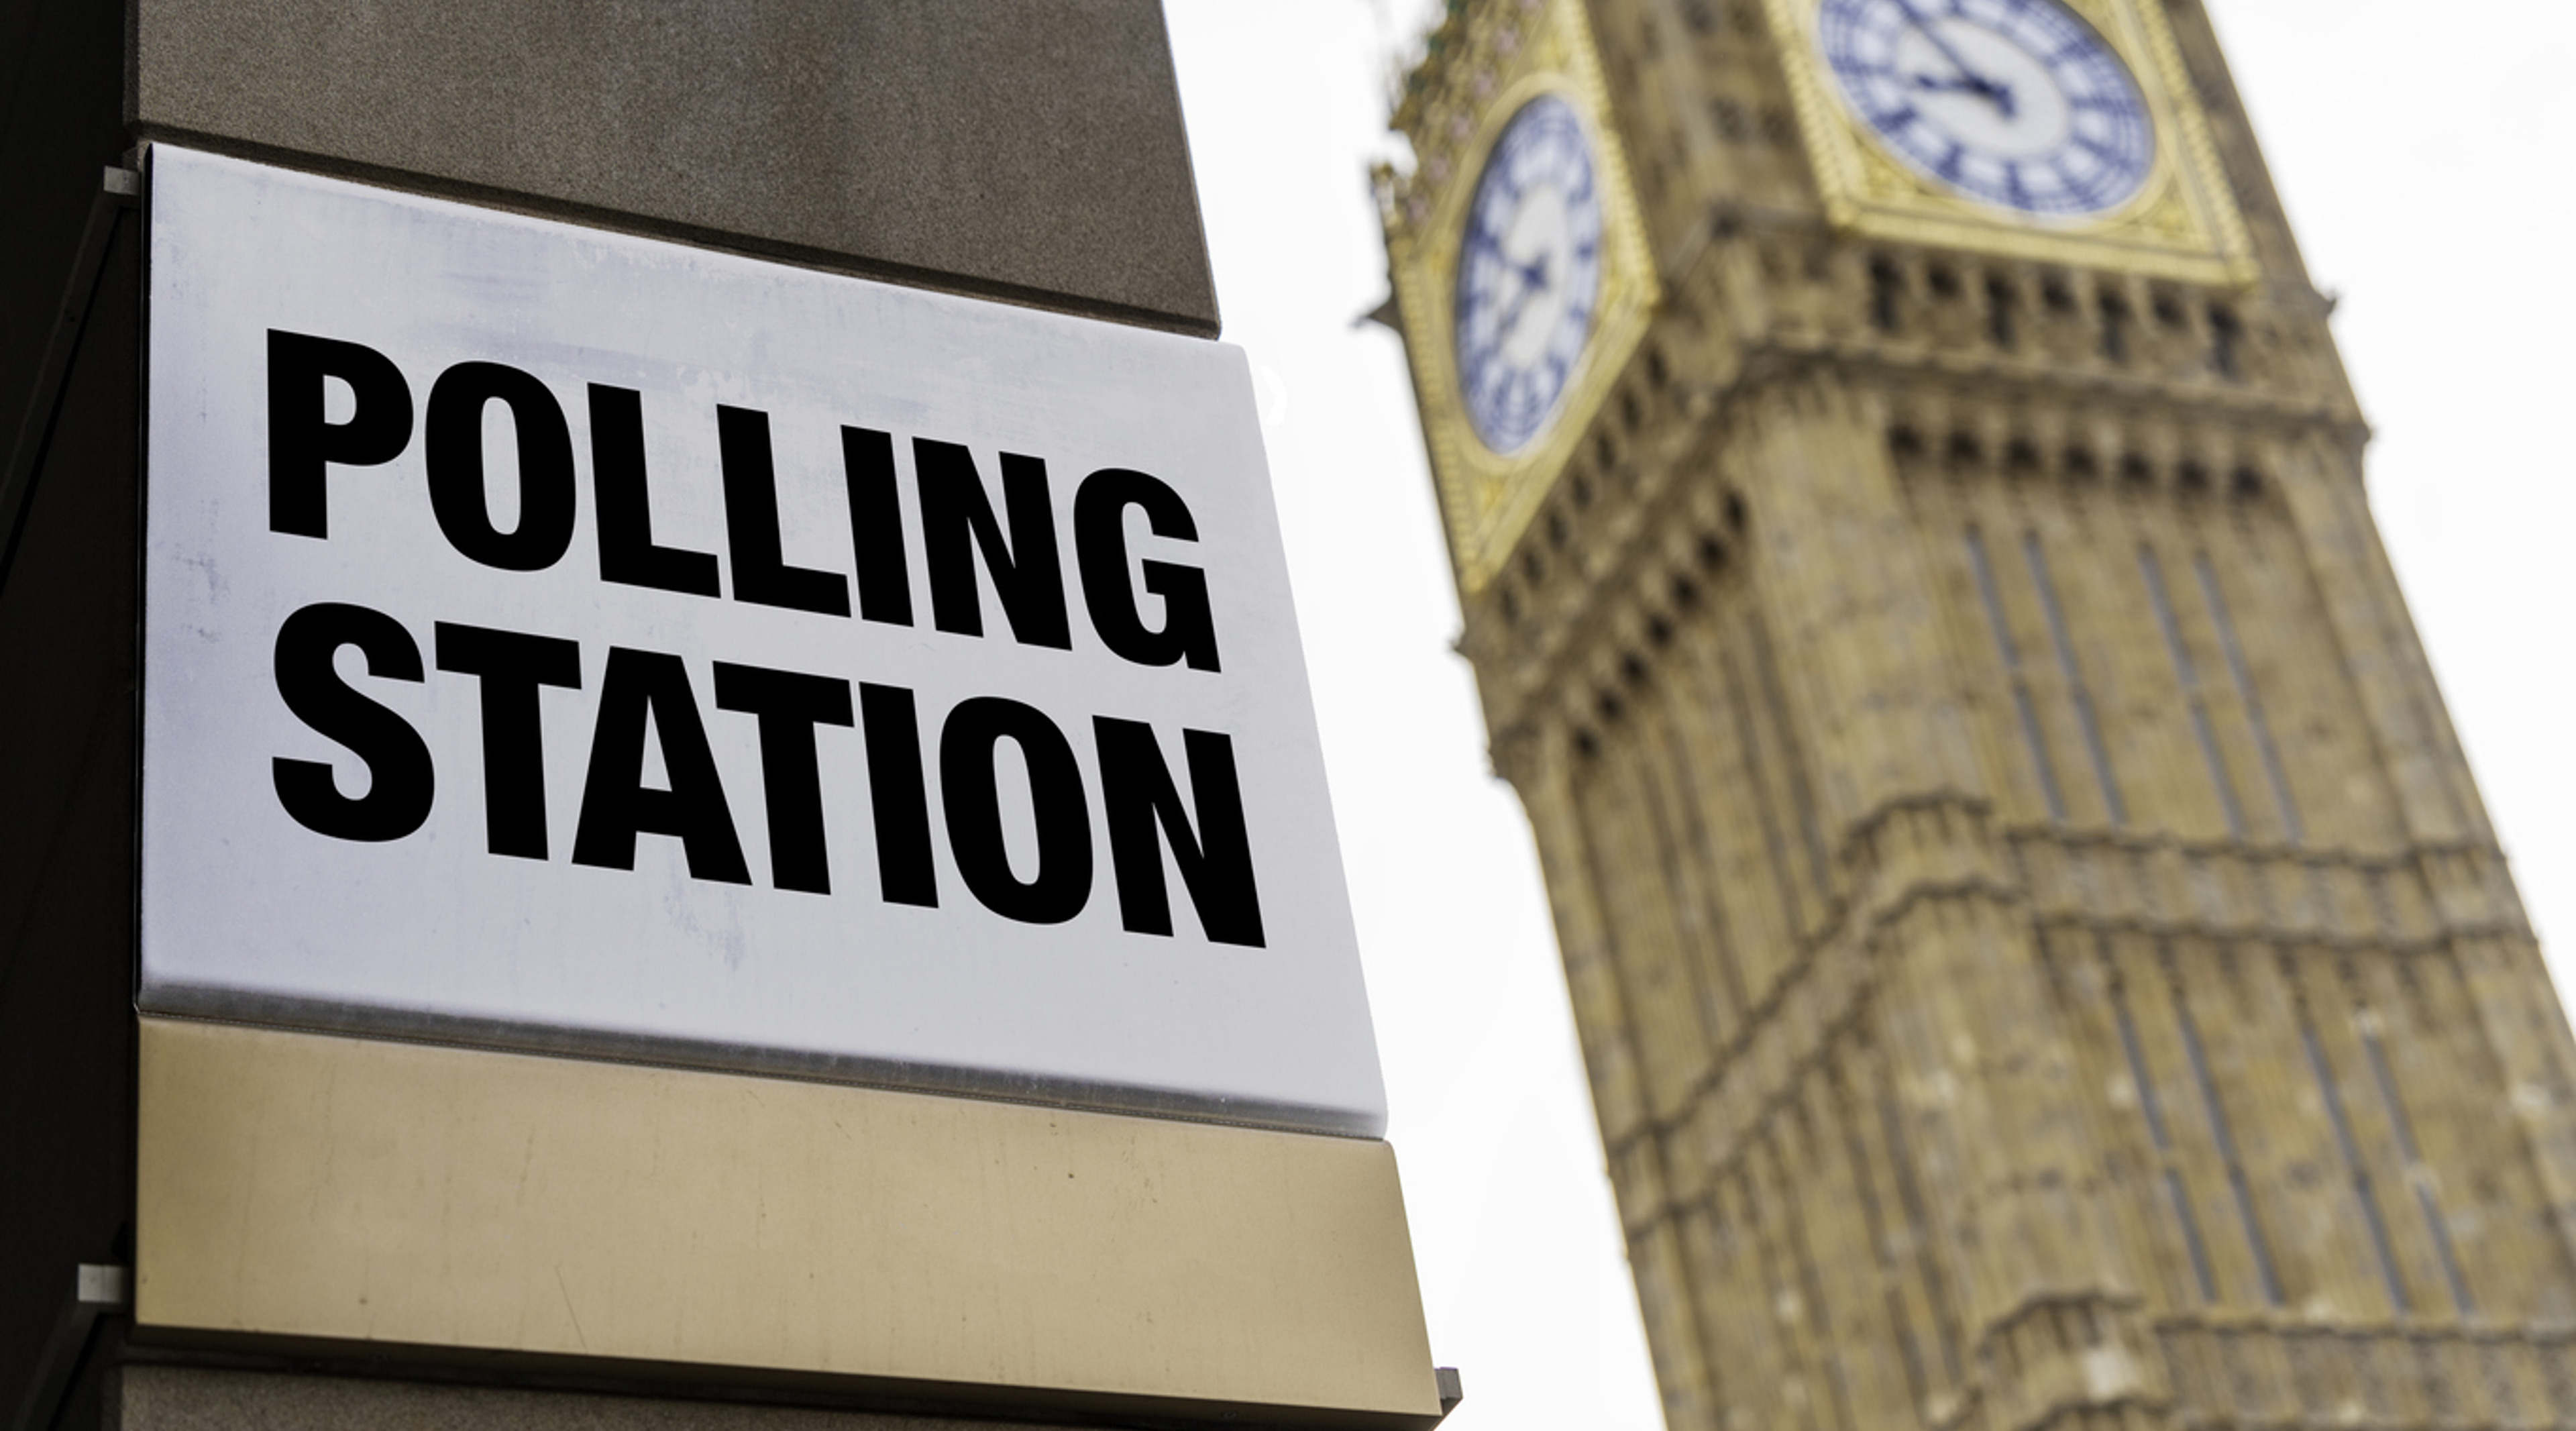 Polling station and UK parliament